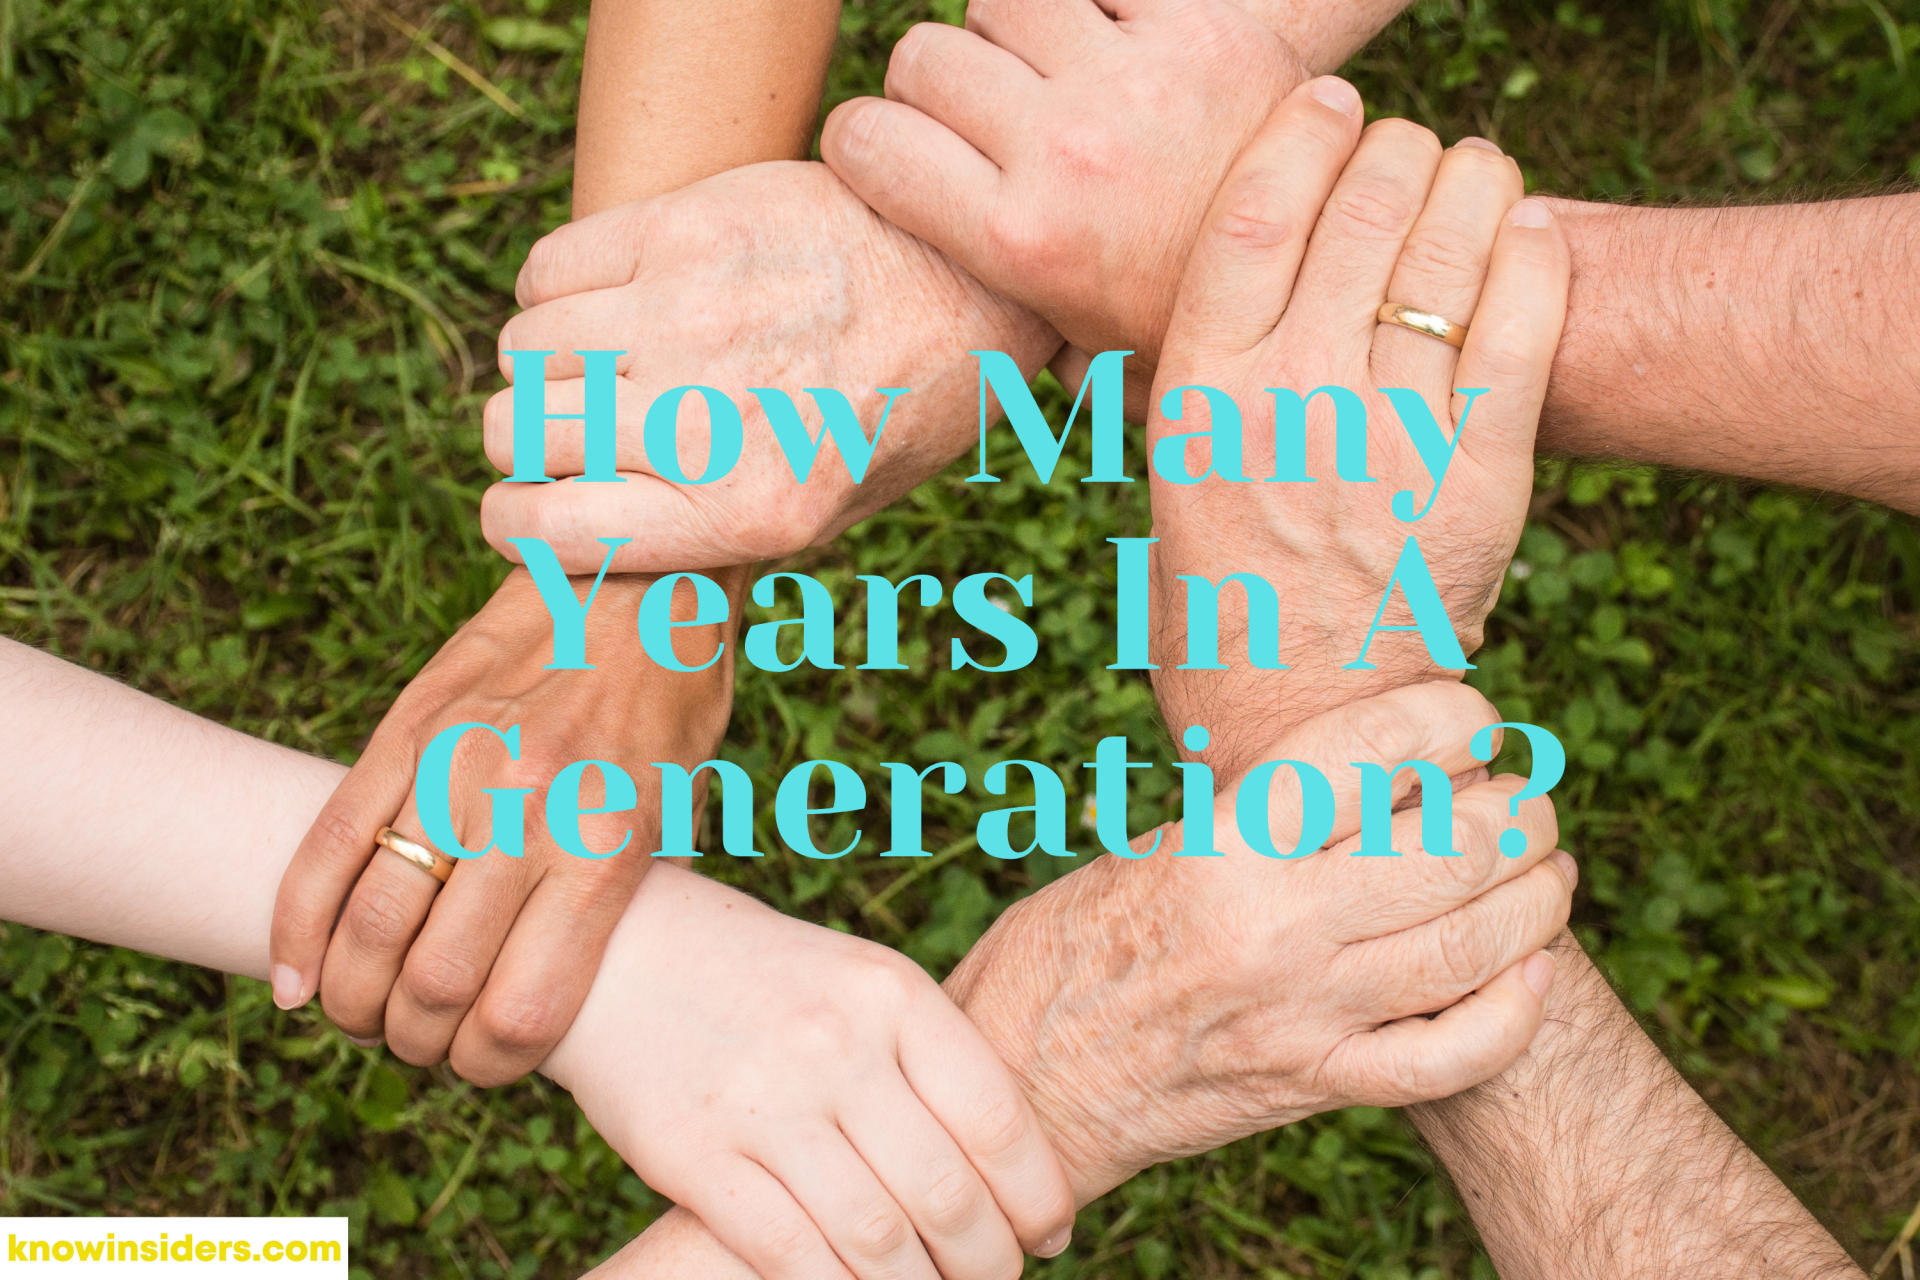 How Many Years In A Generation?